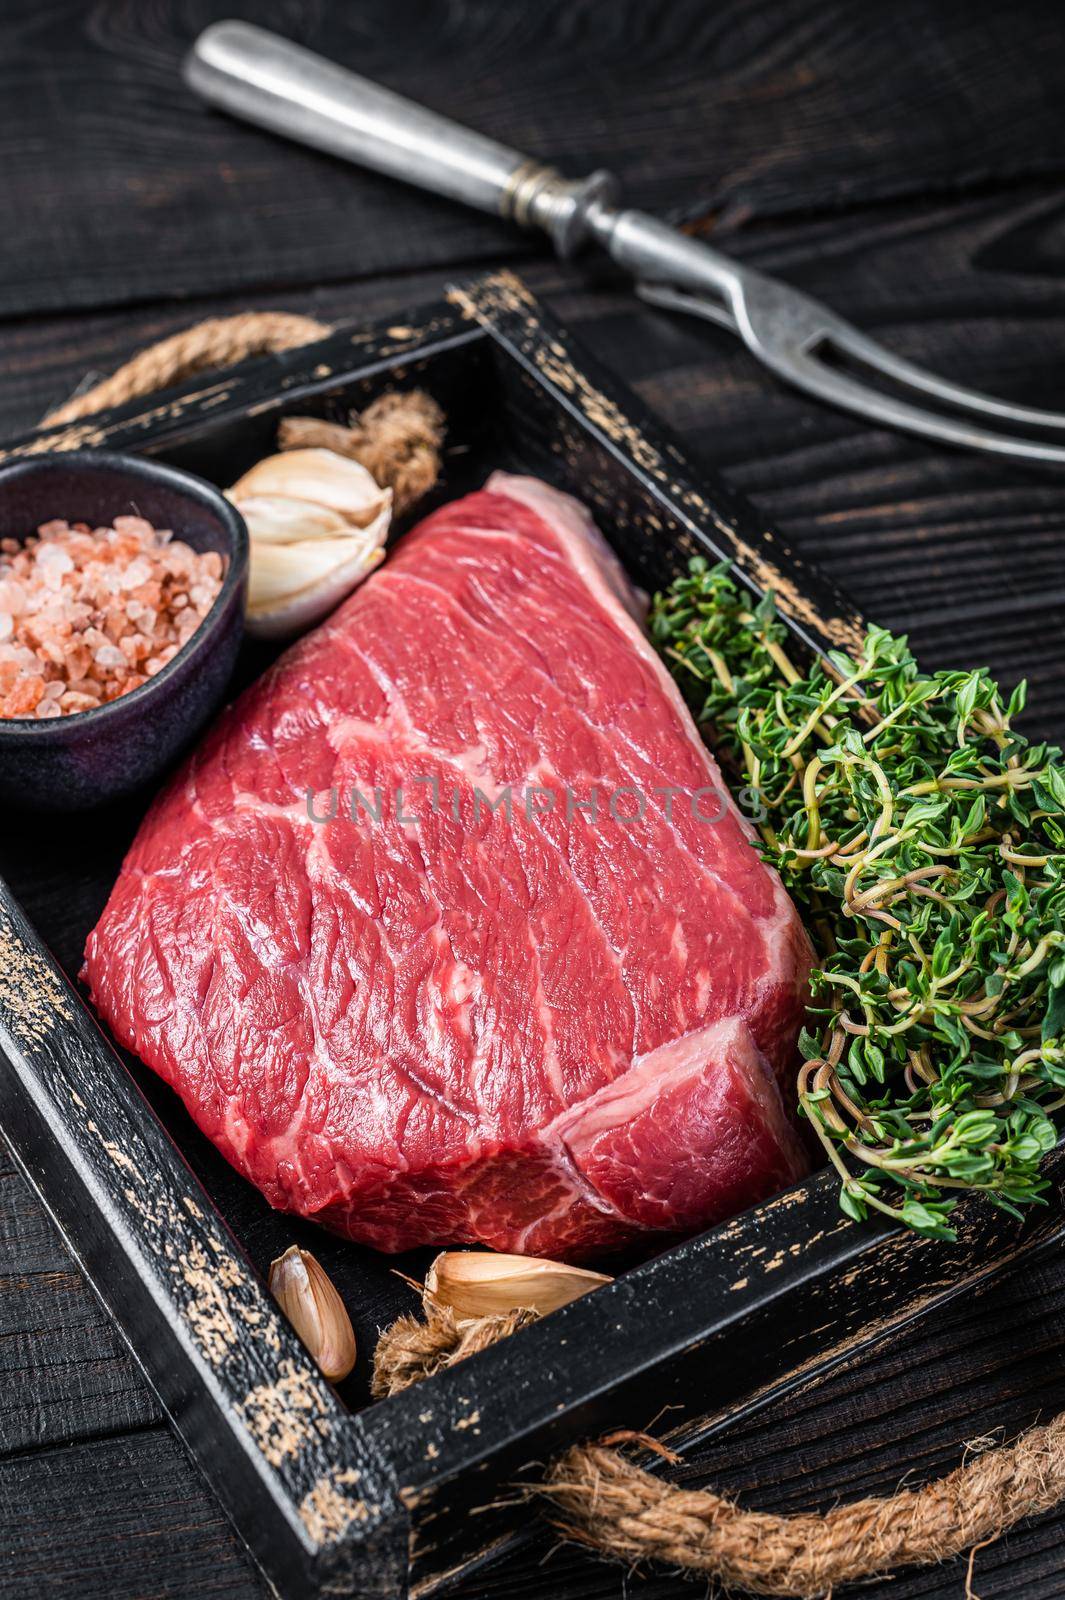 Raw top sirloin cap beef cut meat steak or Picanha in wooden tray with herbs. Black wooden background. Top view by Composter